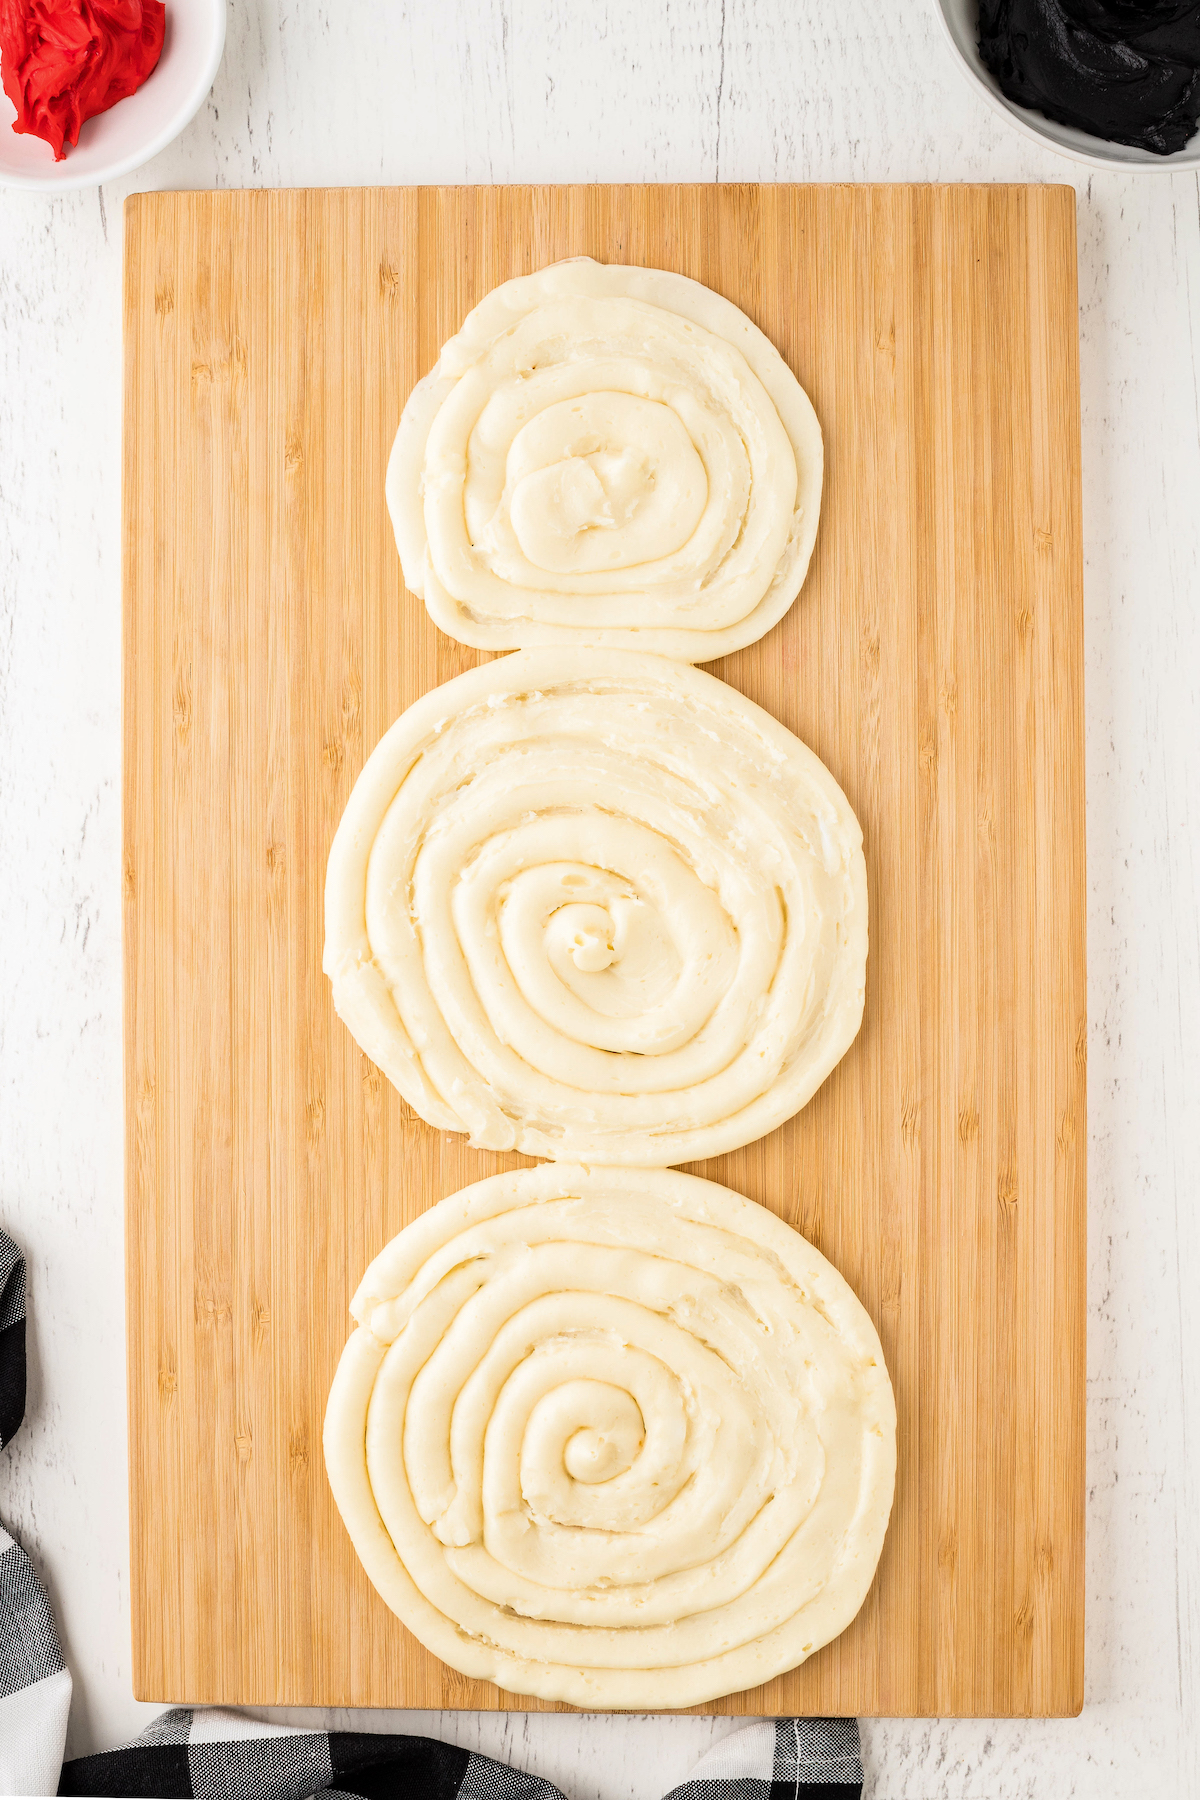 Three circles of white frosting on a wooden board.